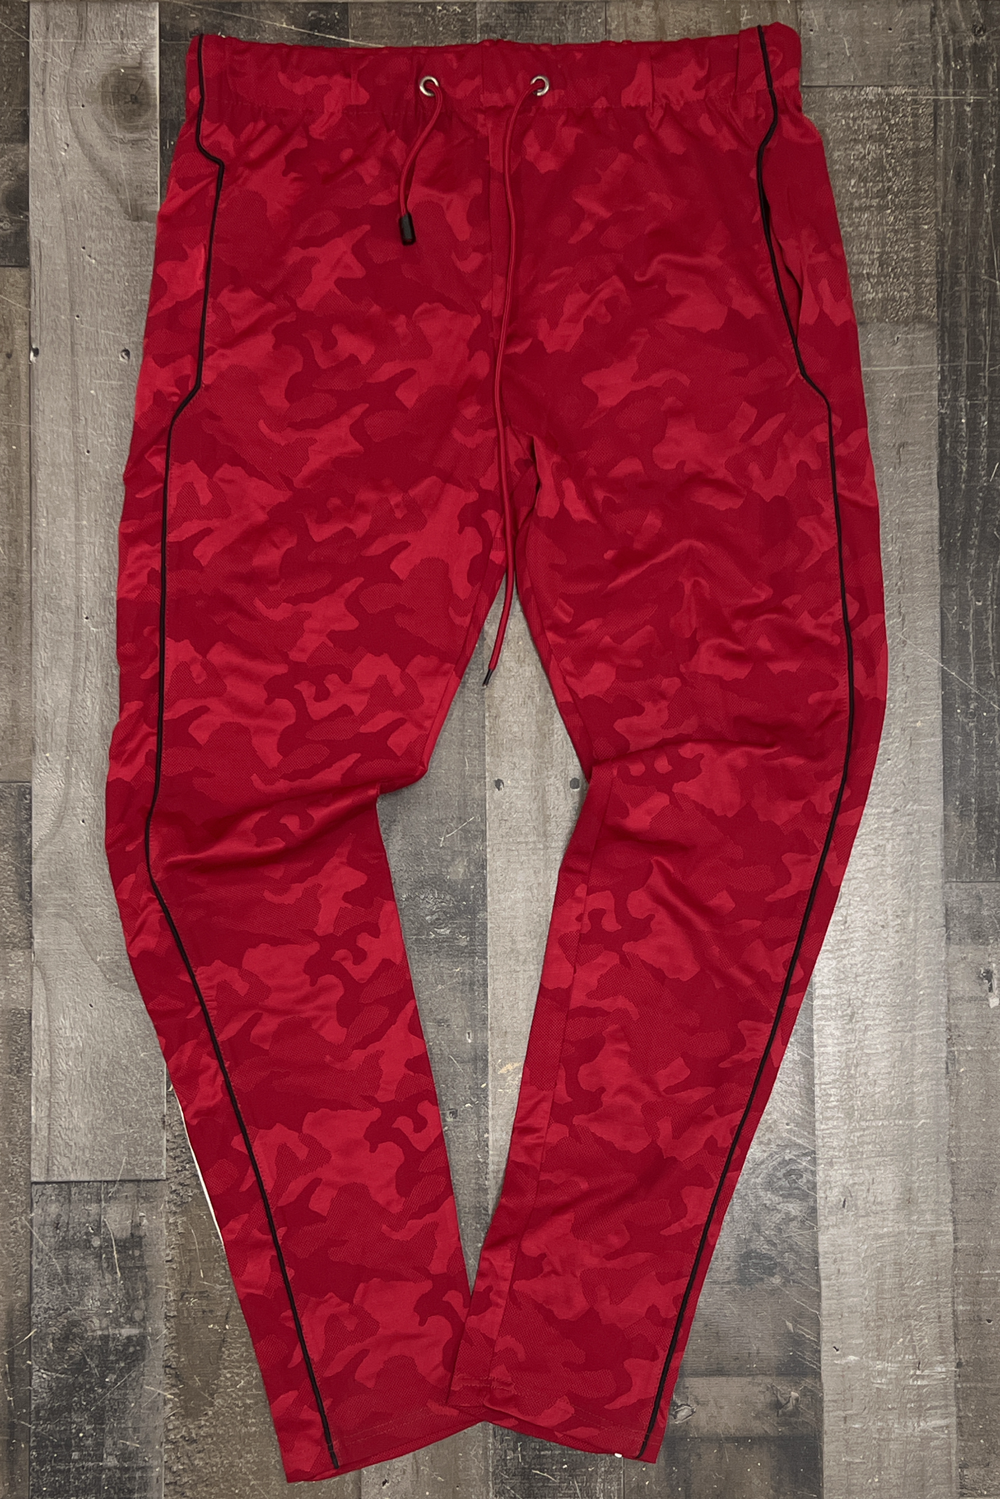 Royal 7even - track pants (red)